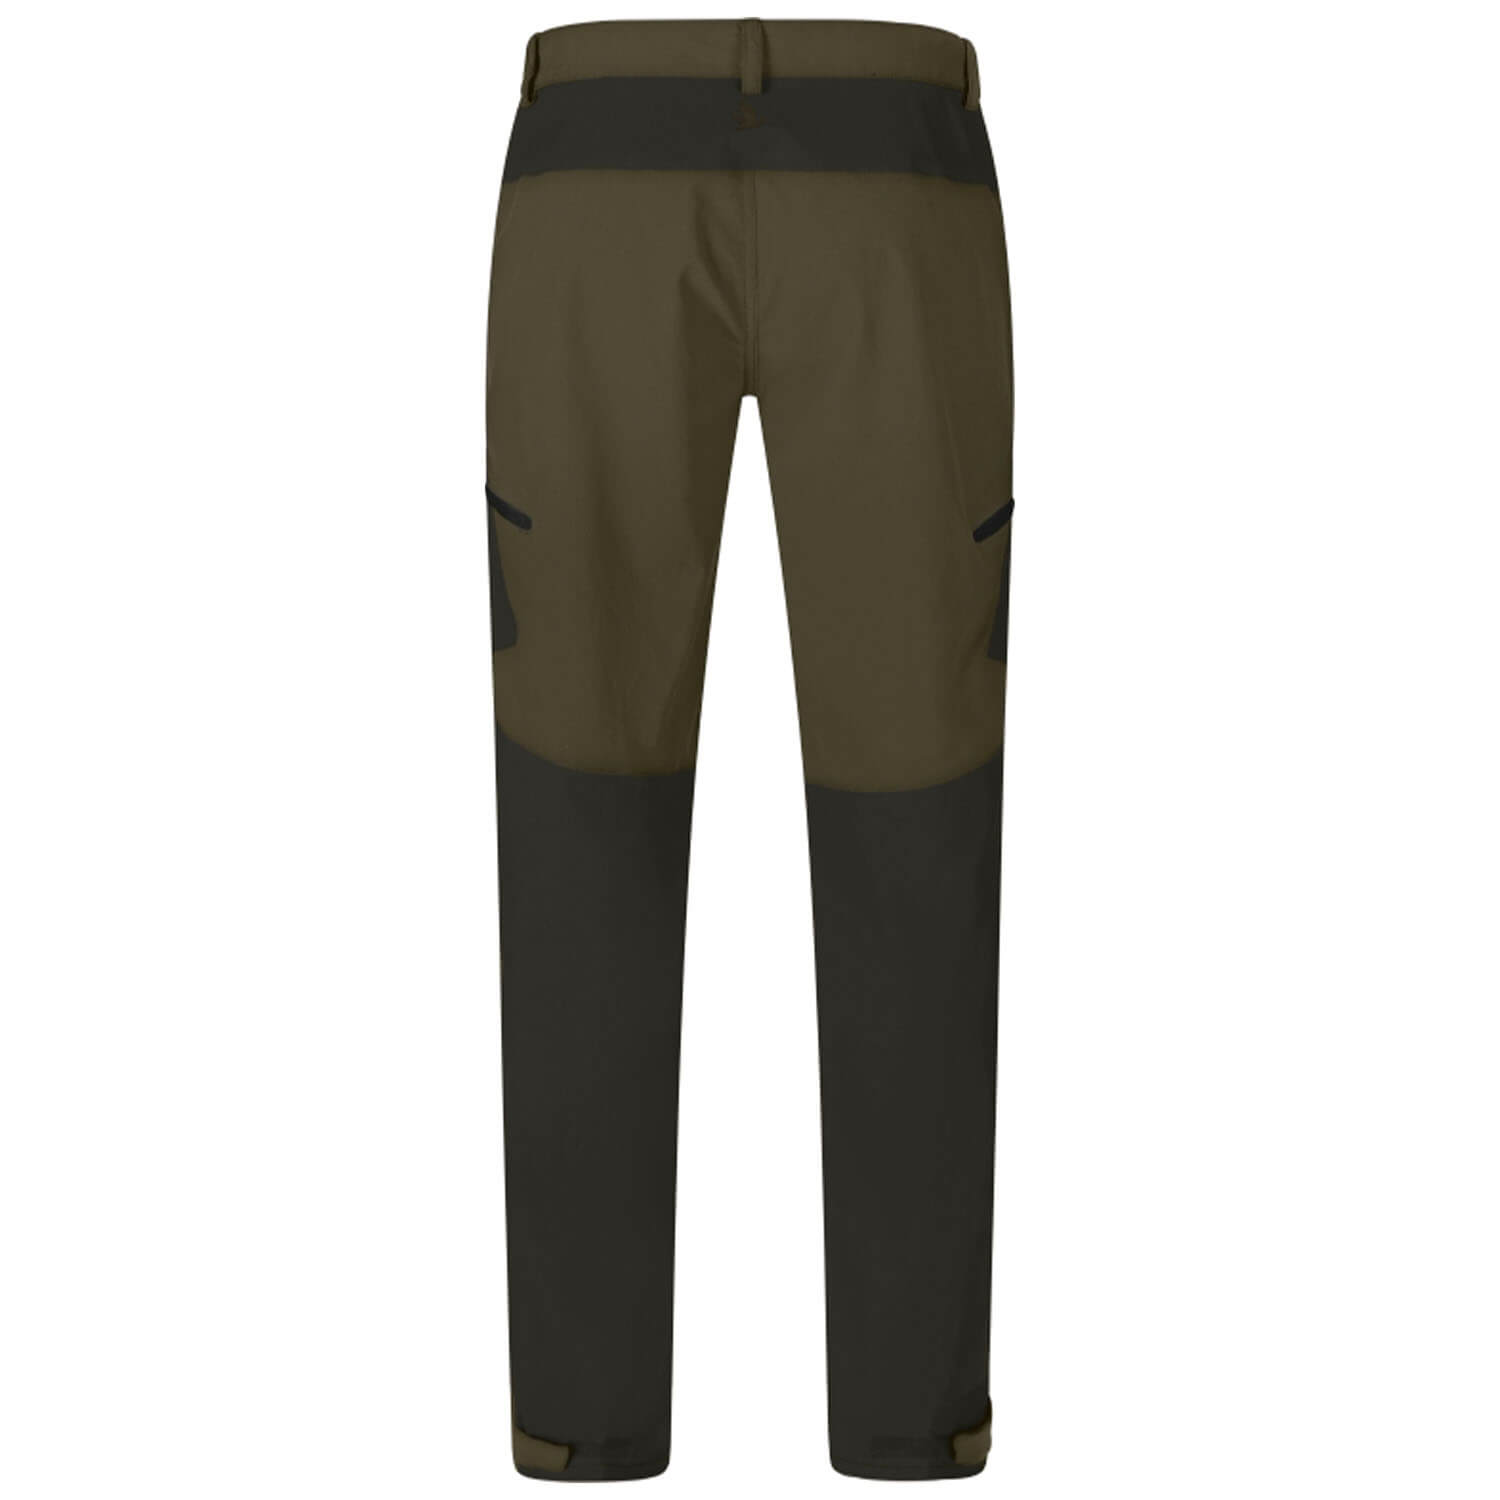 Seeland Jagdhose Outdoor Stretch (Grizzly brown)